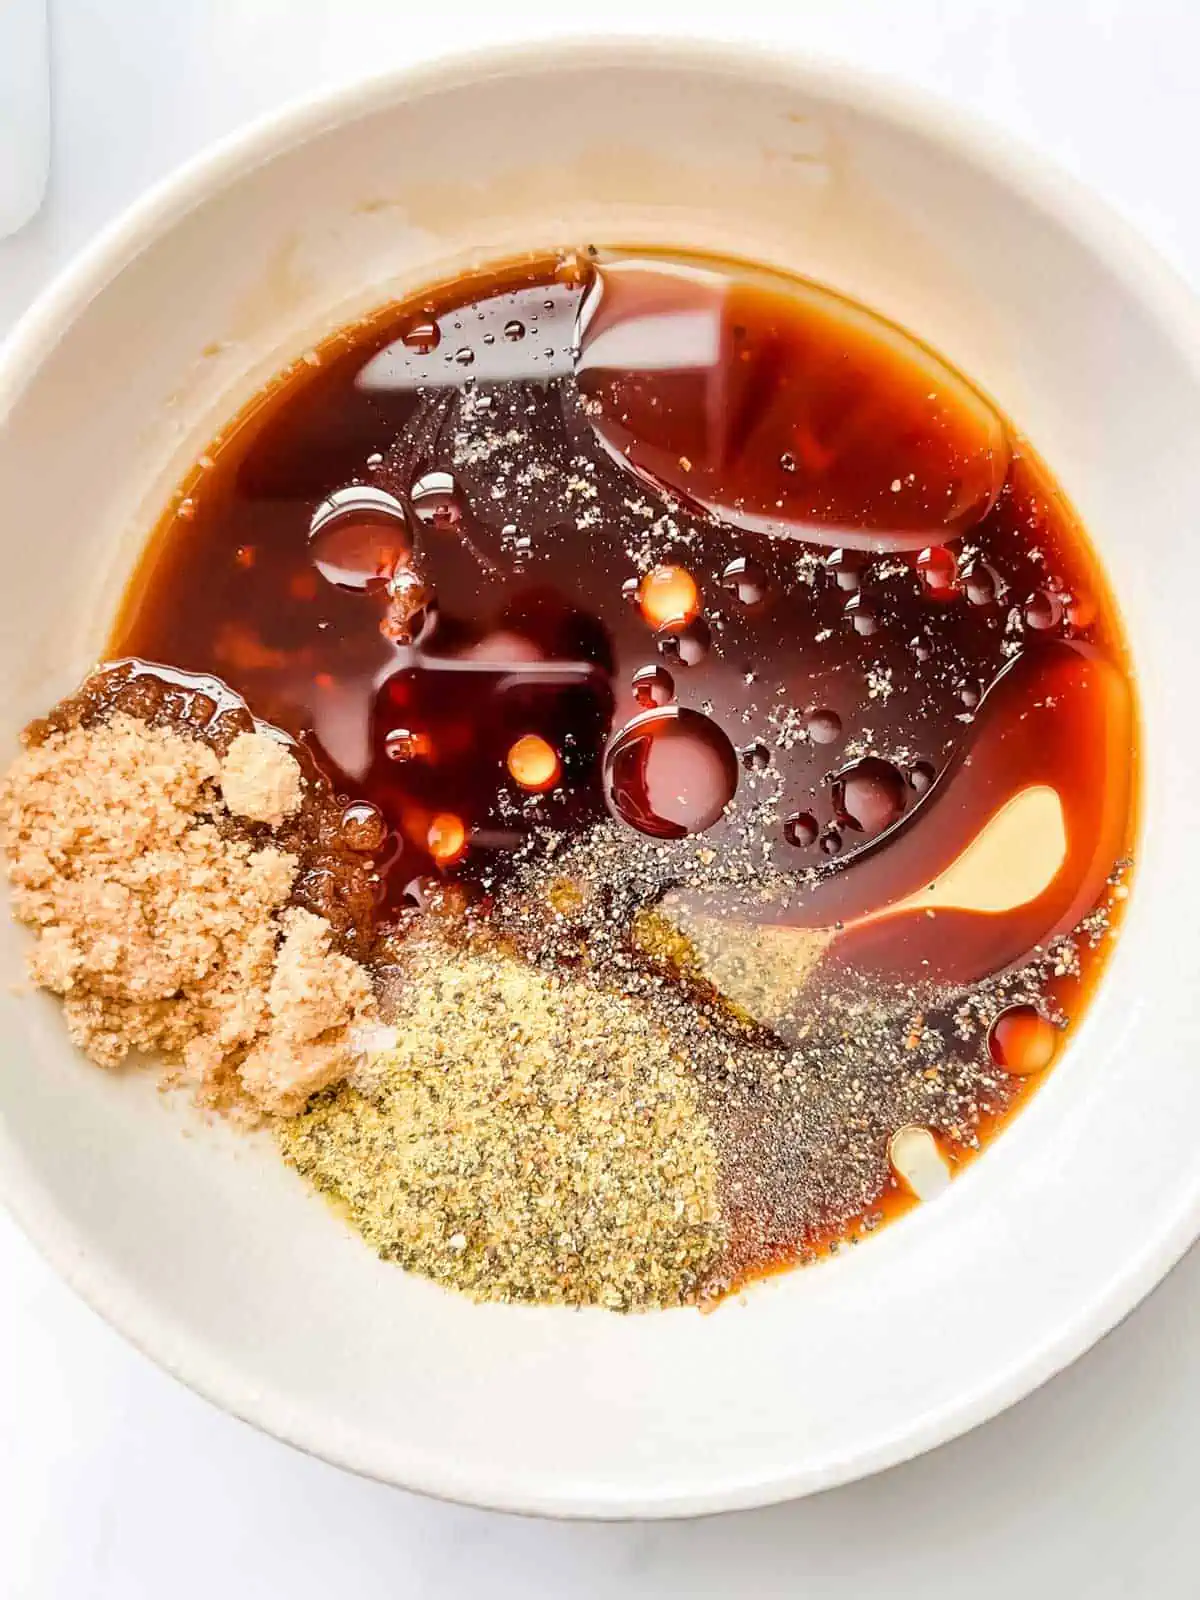 Photo of oil, soy sauce, brown sugar, and seasonings in a small bowl.